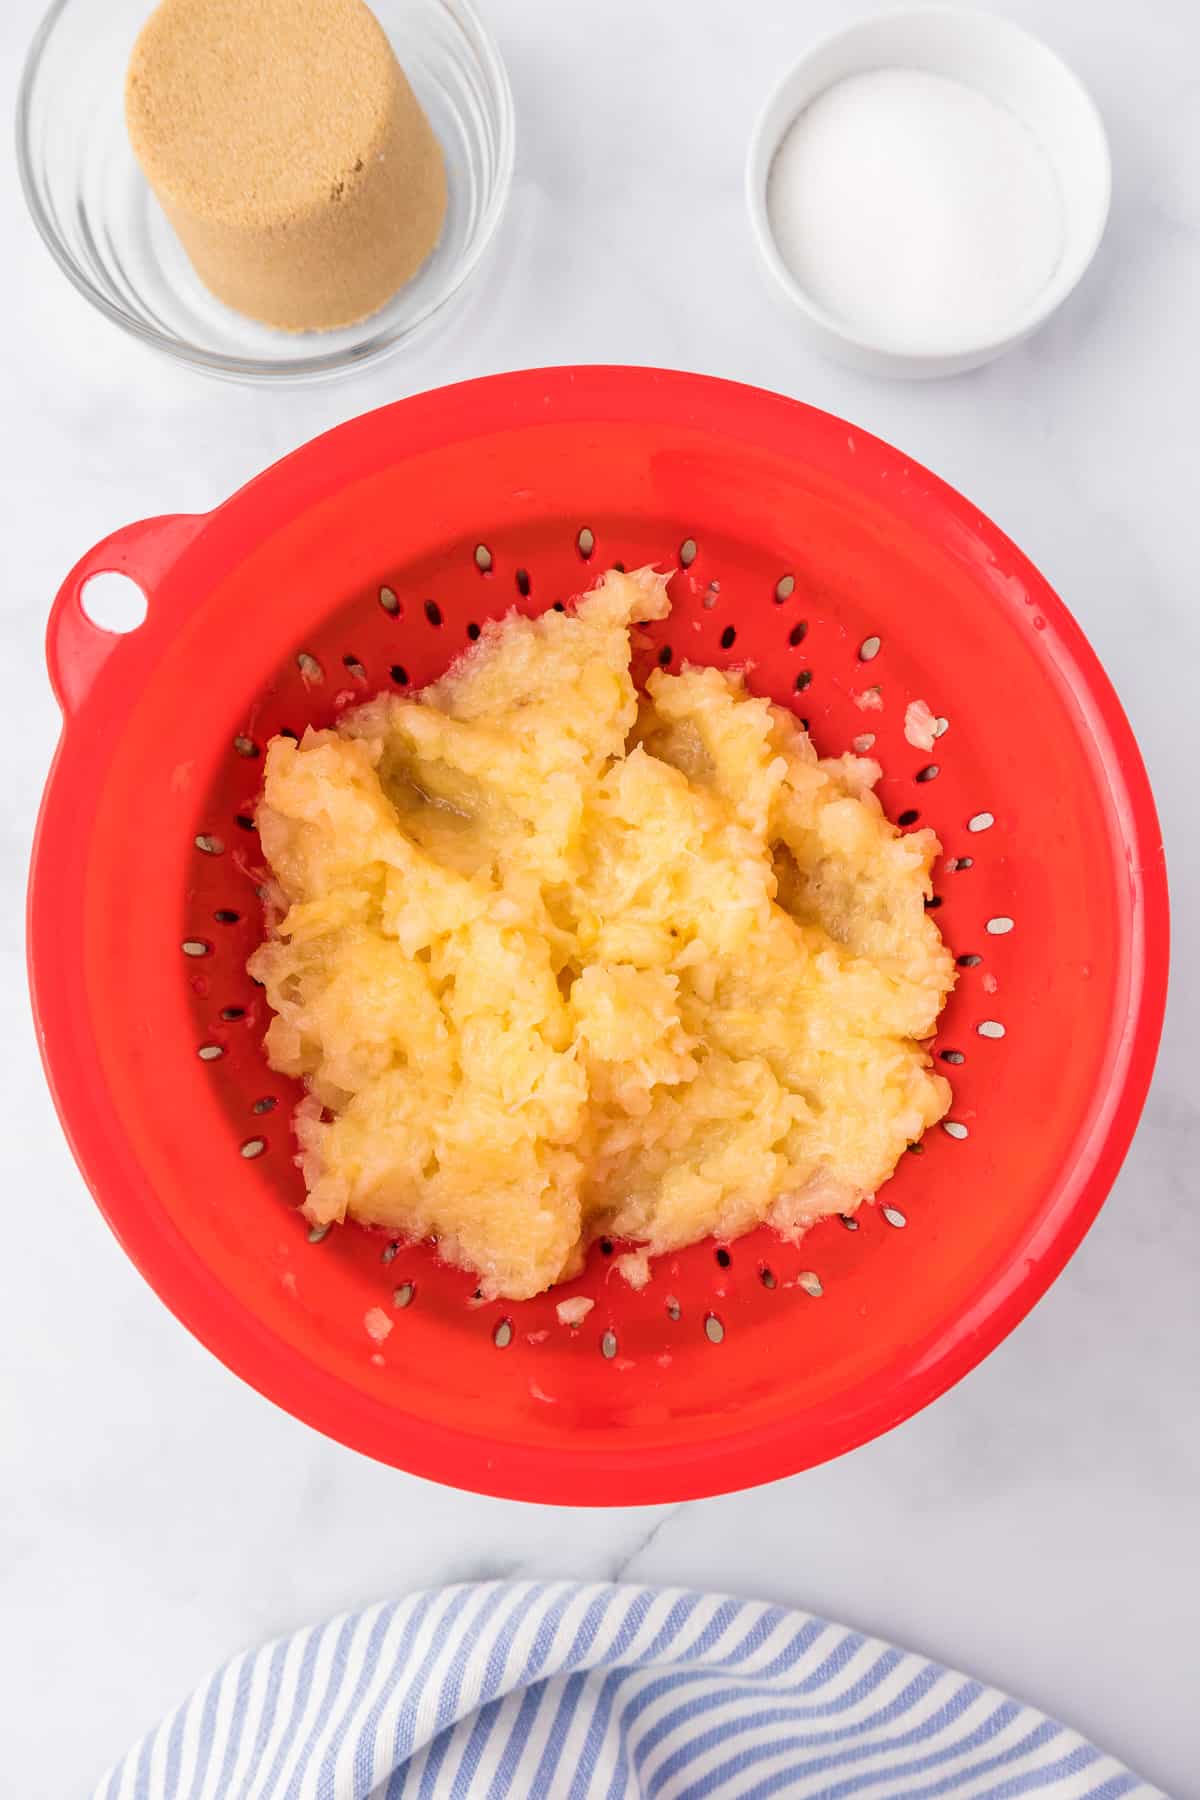 Pineapple being drained in a colander from above with brown sugar and sugar nearby in bowls.